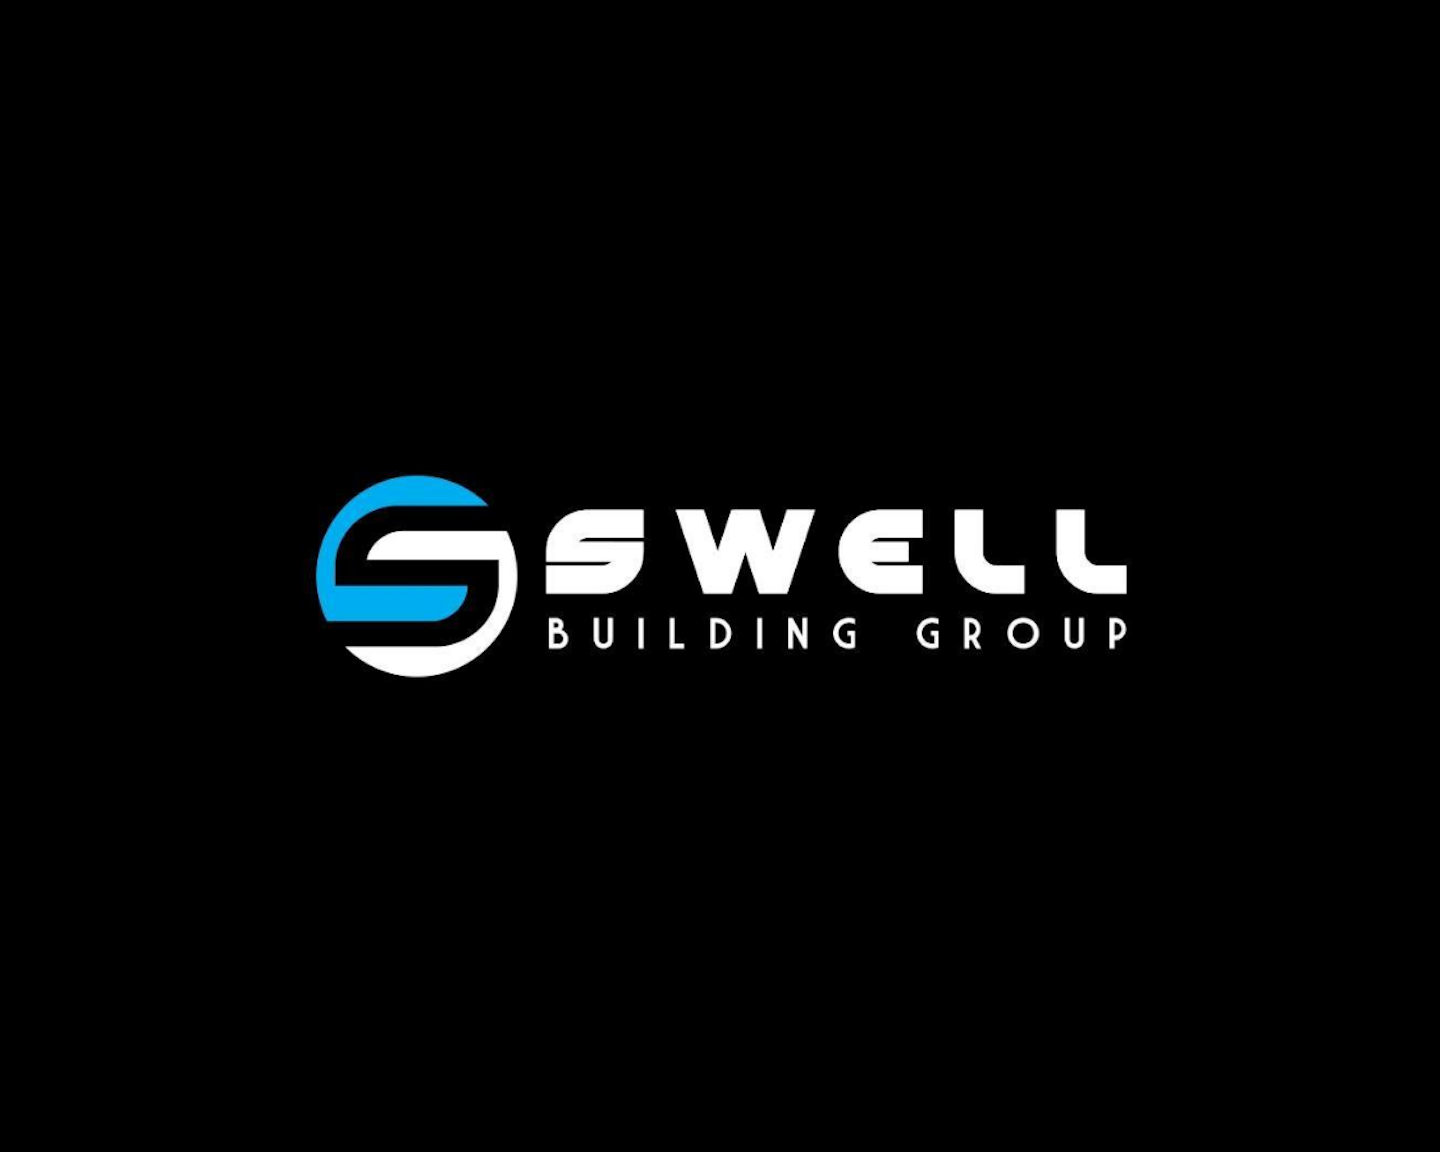 swell building group logo